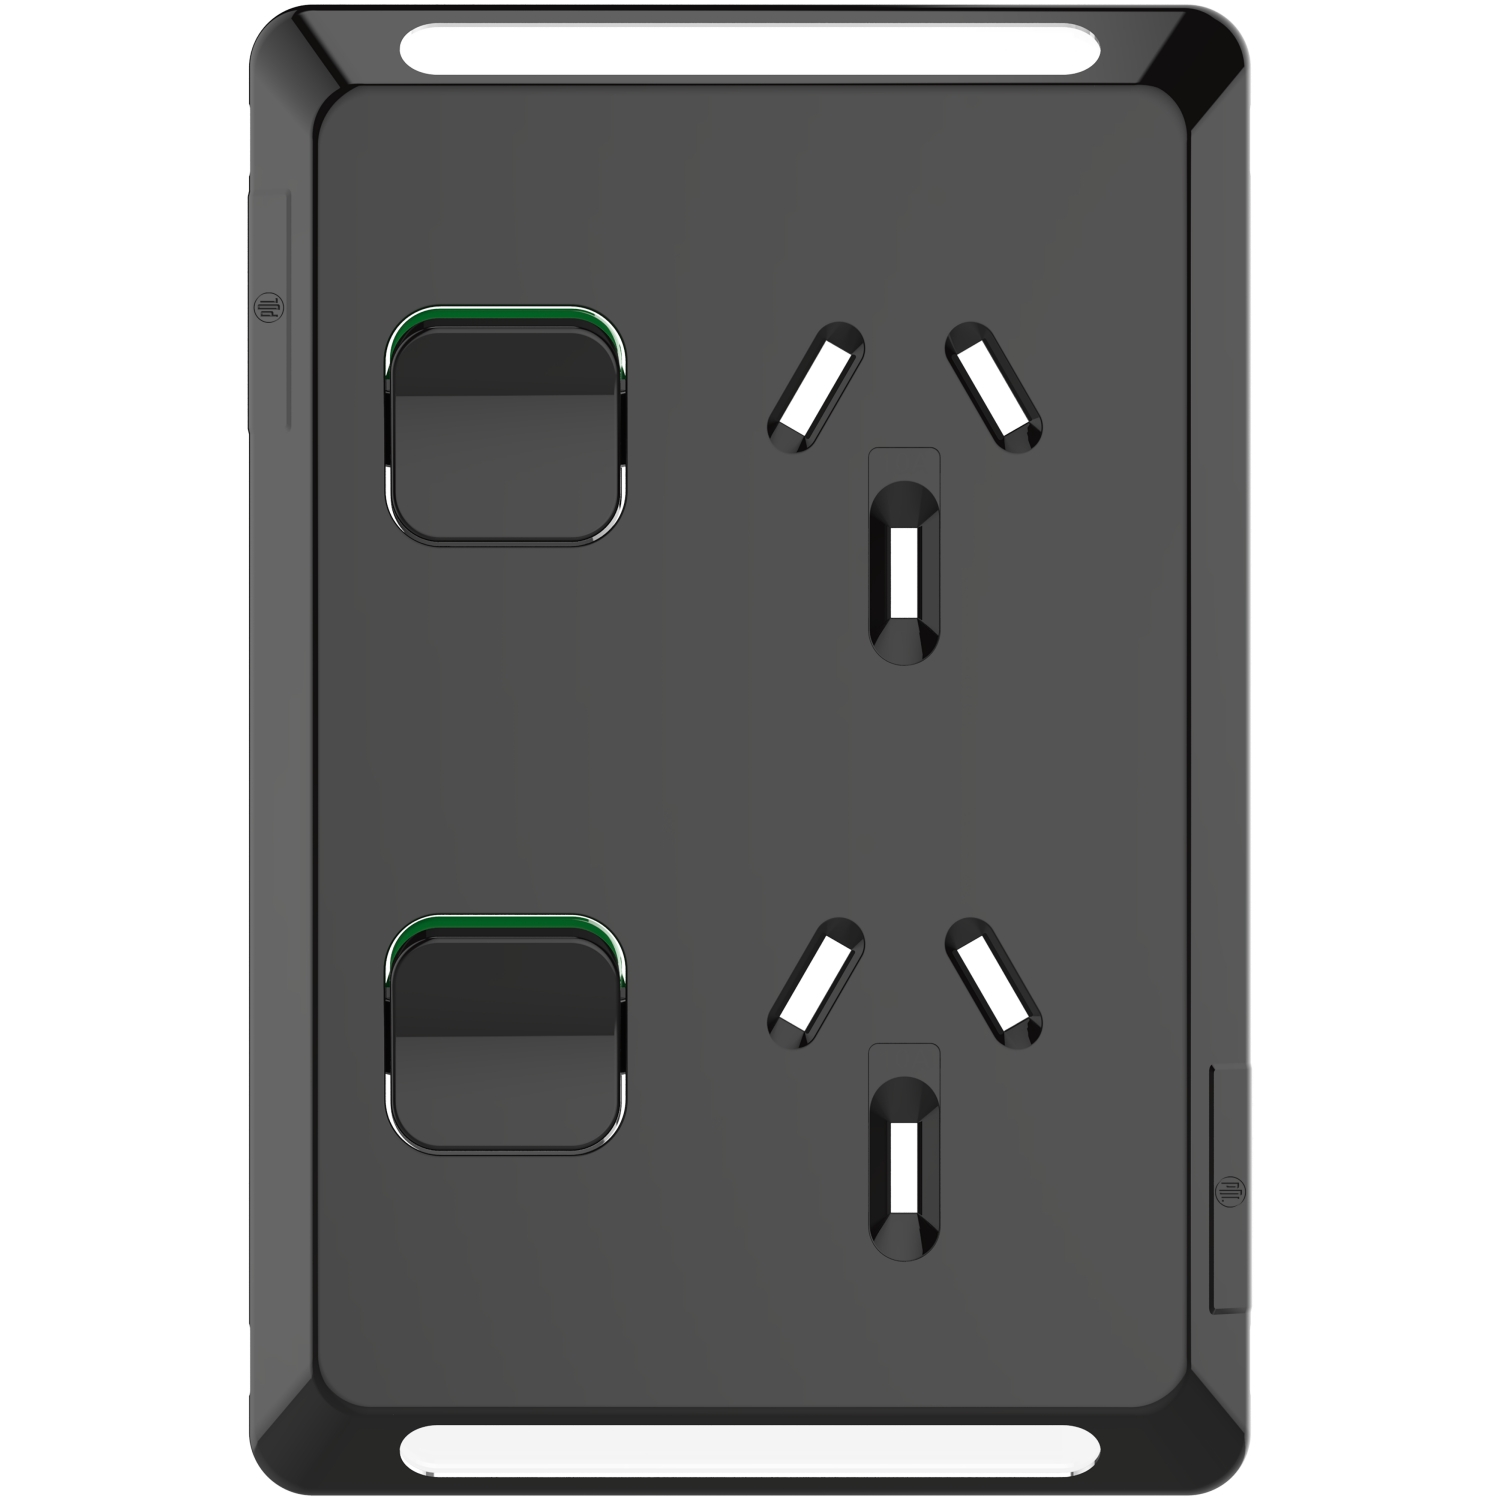 PDL Pro Series - Cover Plate Double Switched Socket 10A Vertical - Black